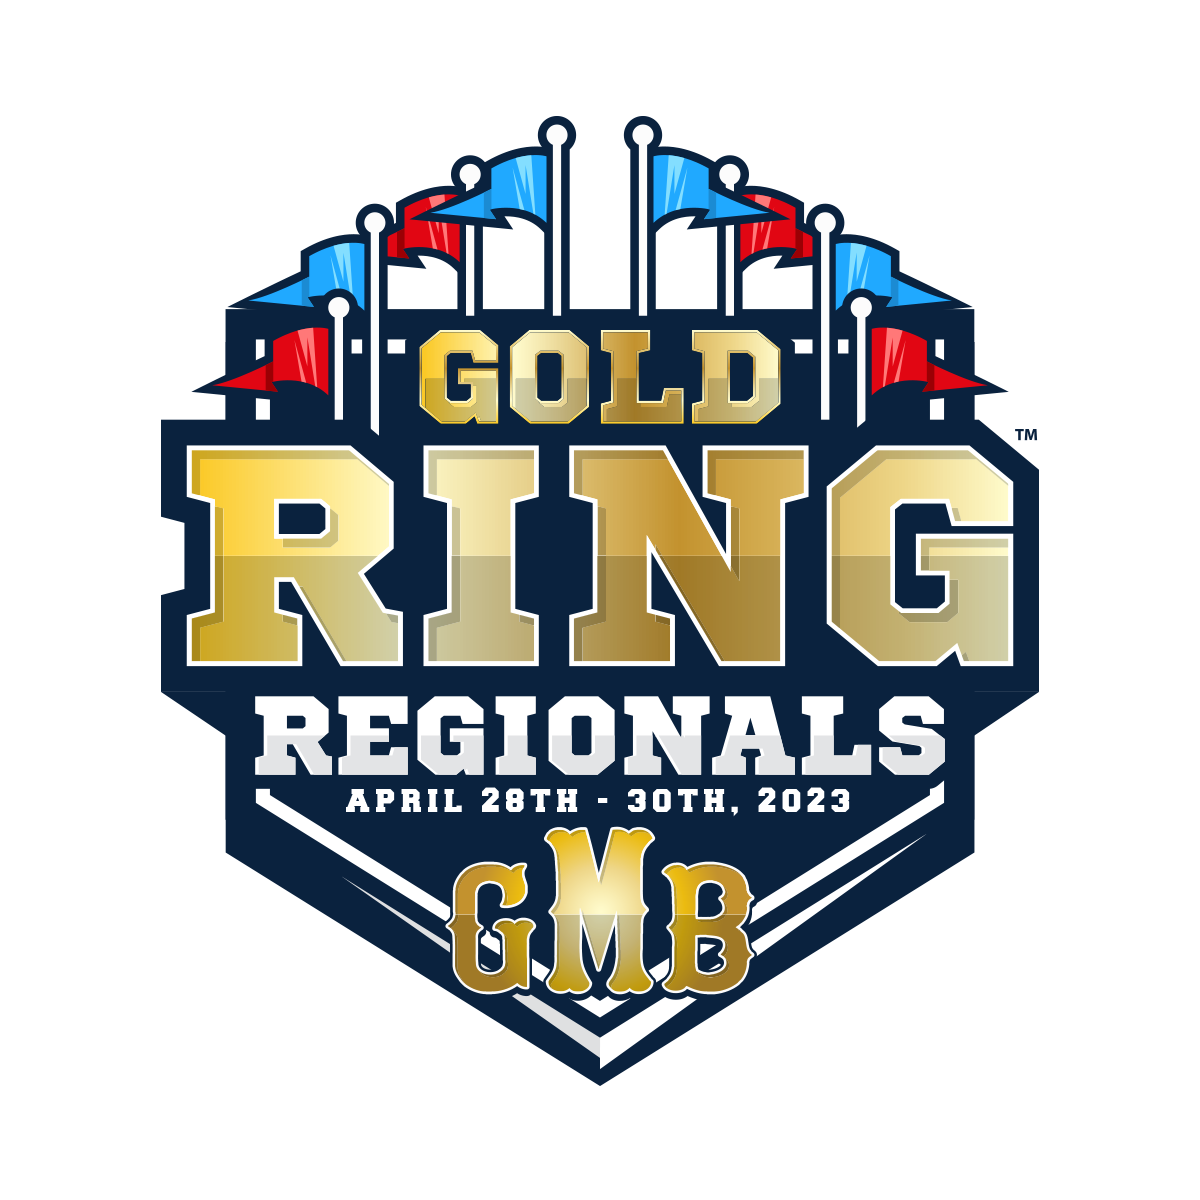 2023 GMB Gold Ring Regionals Tennessee 04/28/2023 04/30/2023